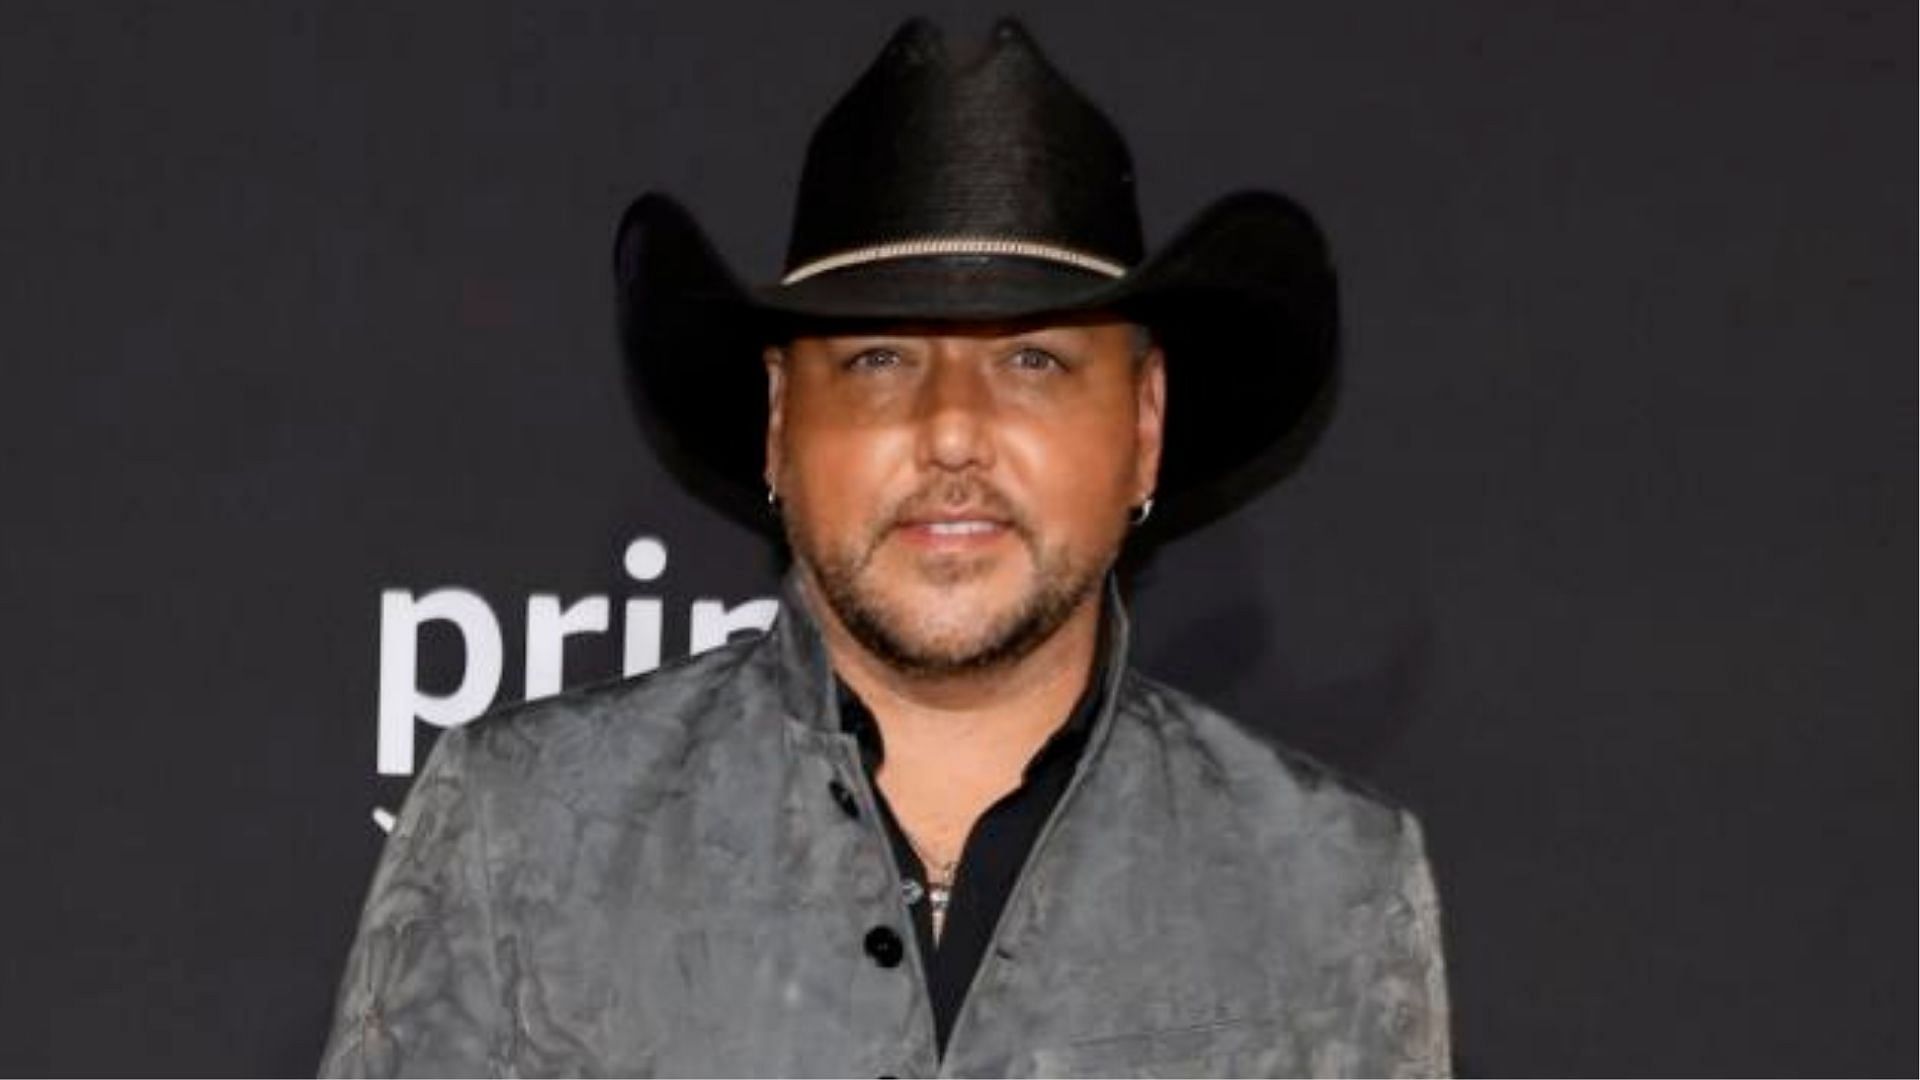 Jason Aldean gun song controversy explained as lyrics spark online outrage (Image via Getty Images)